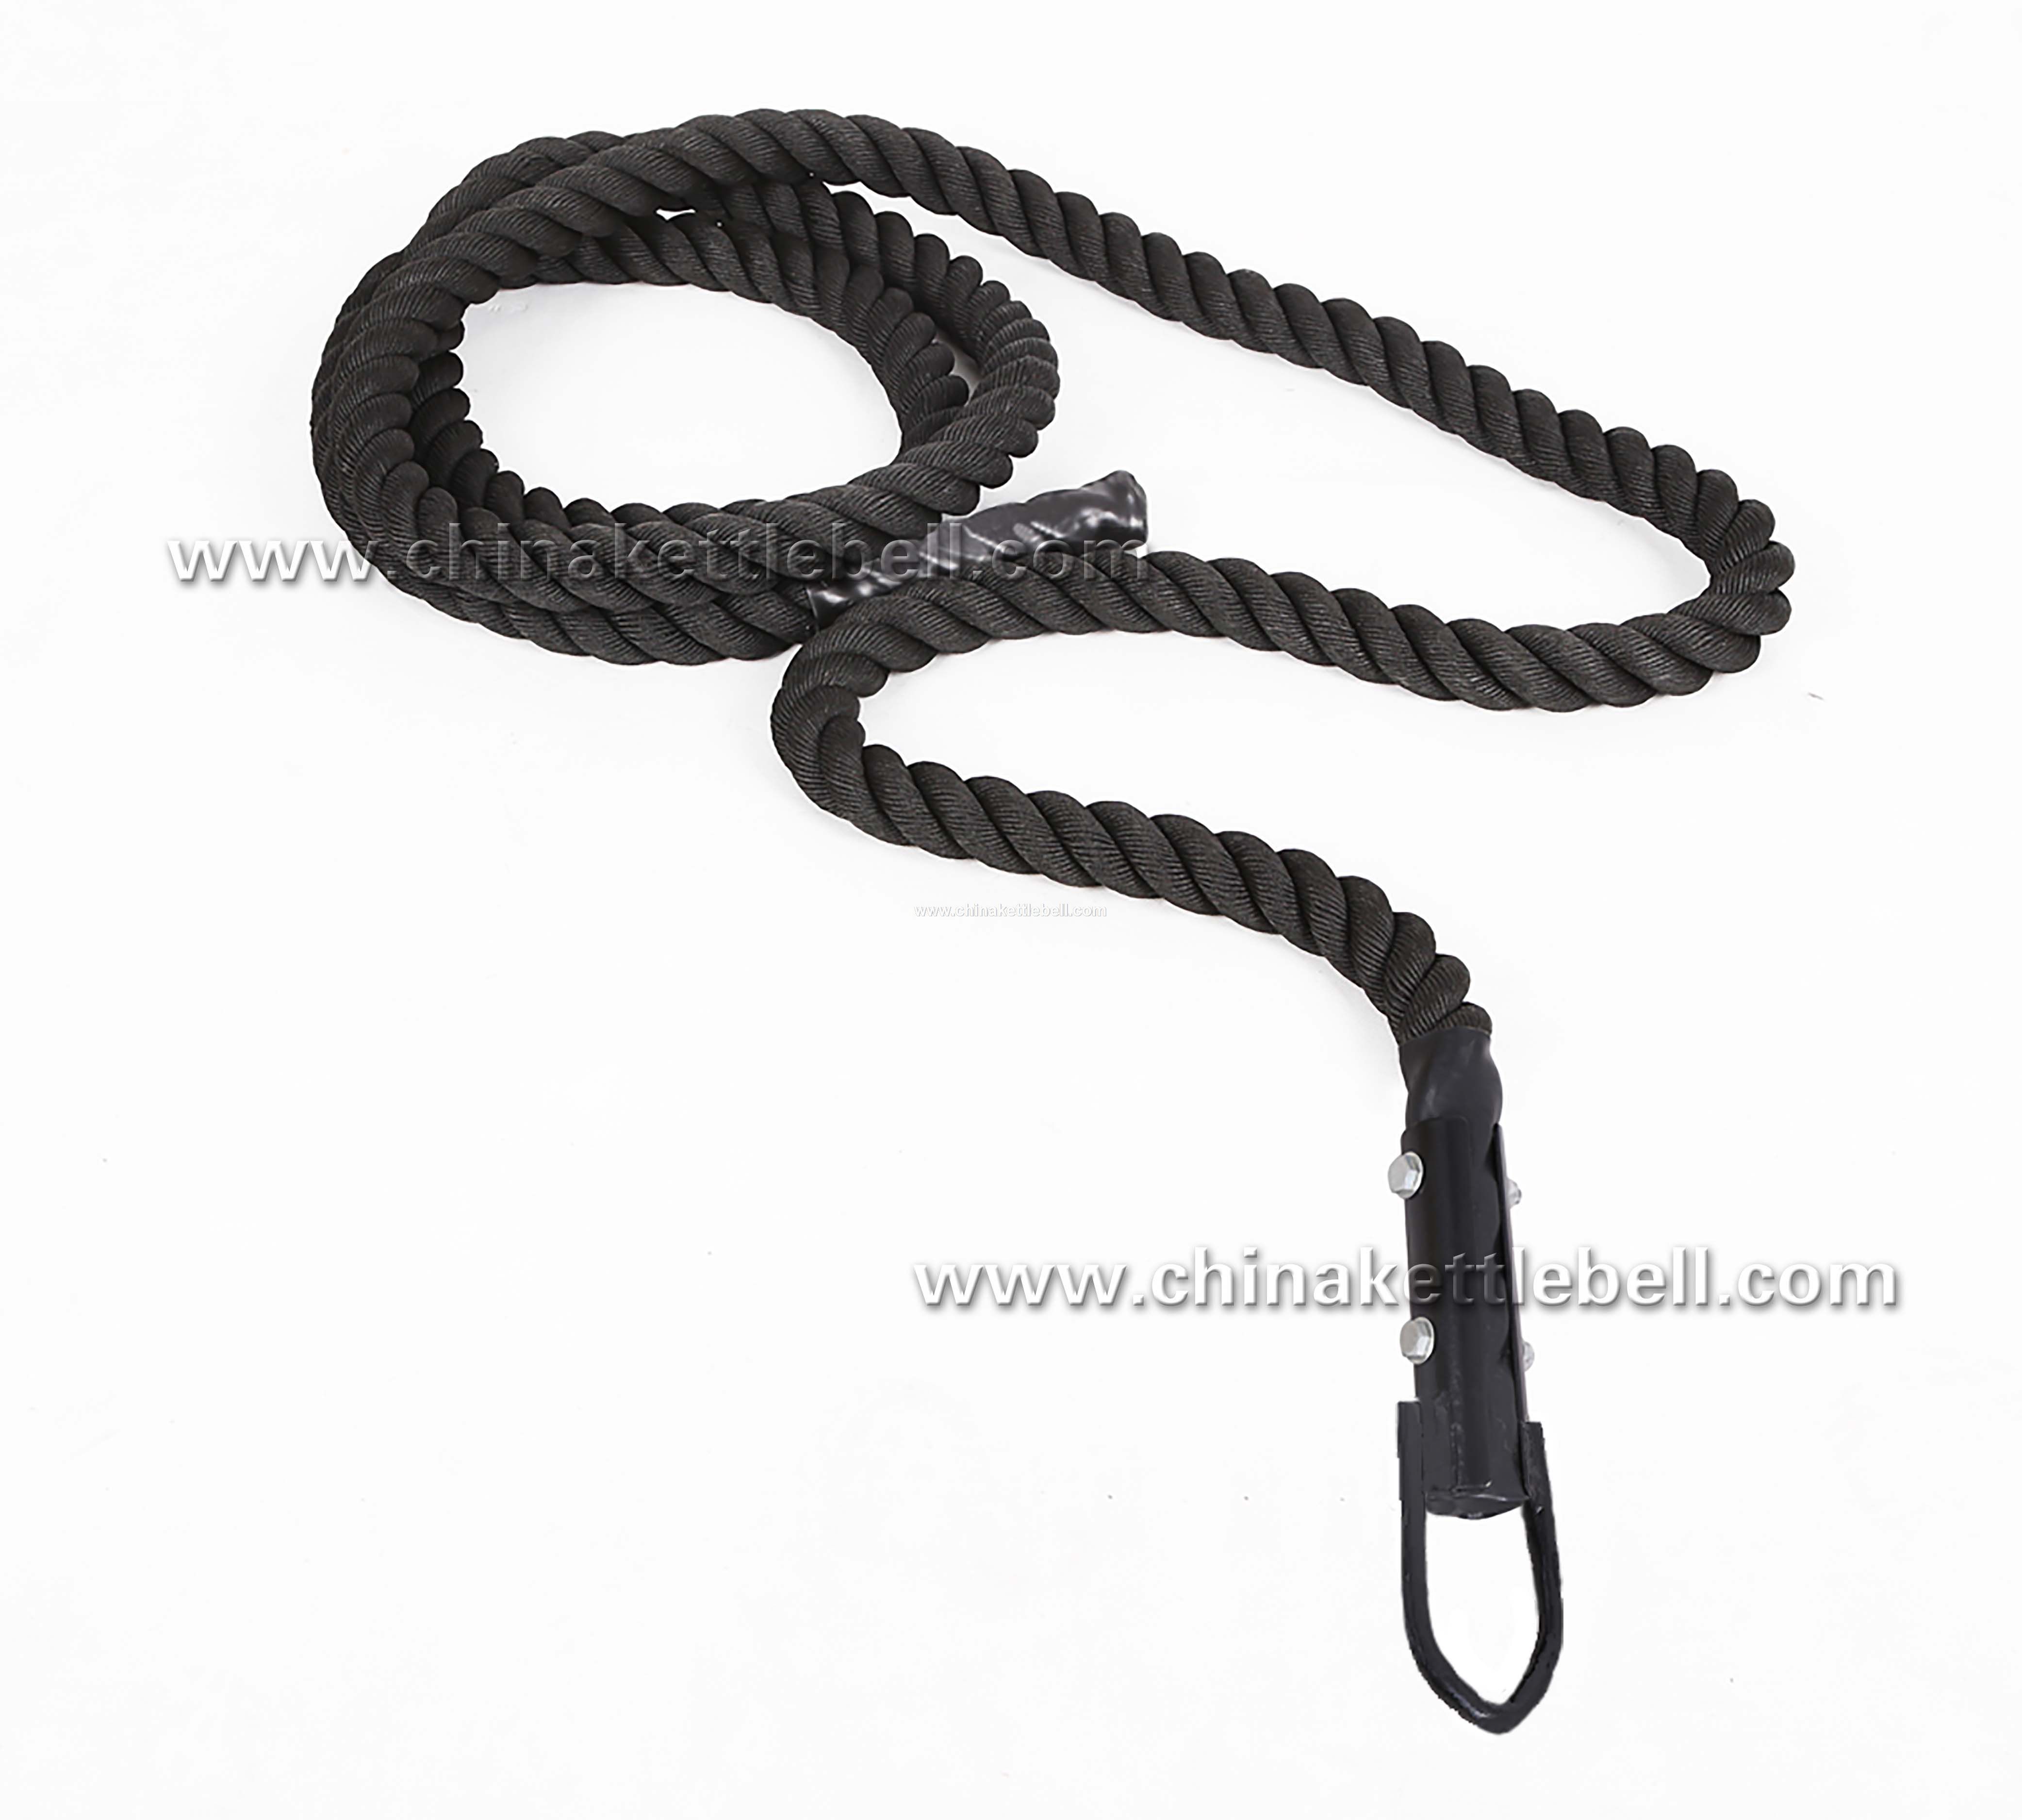 Climbing Rope with Eyelet